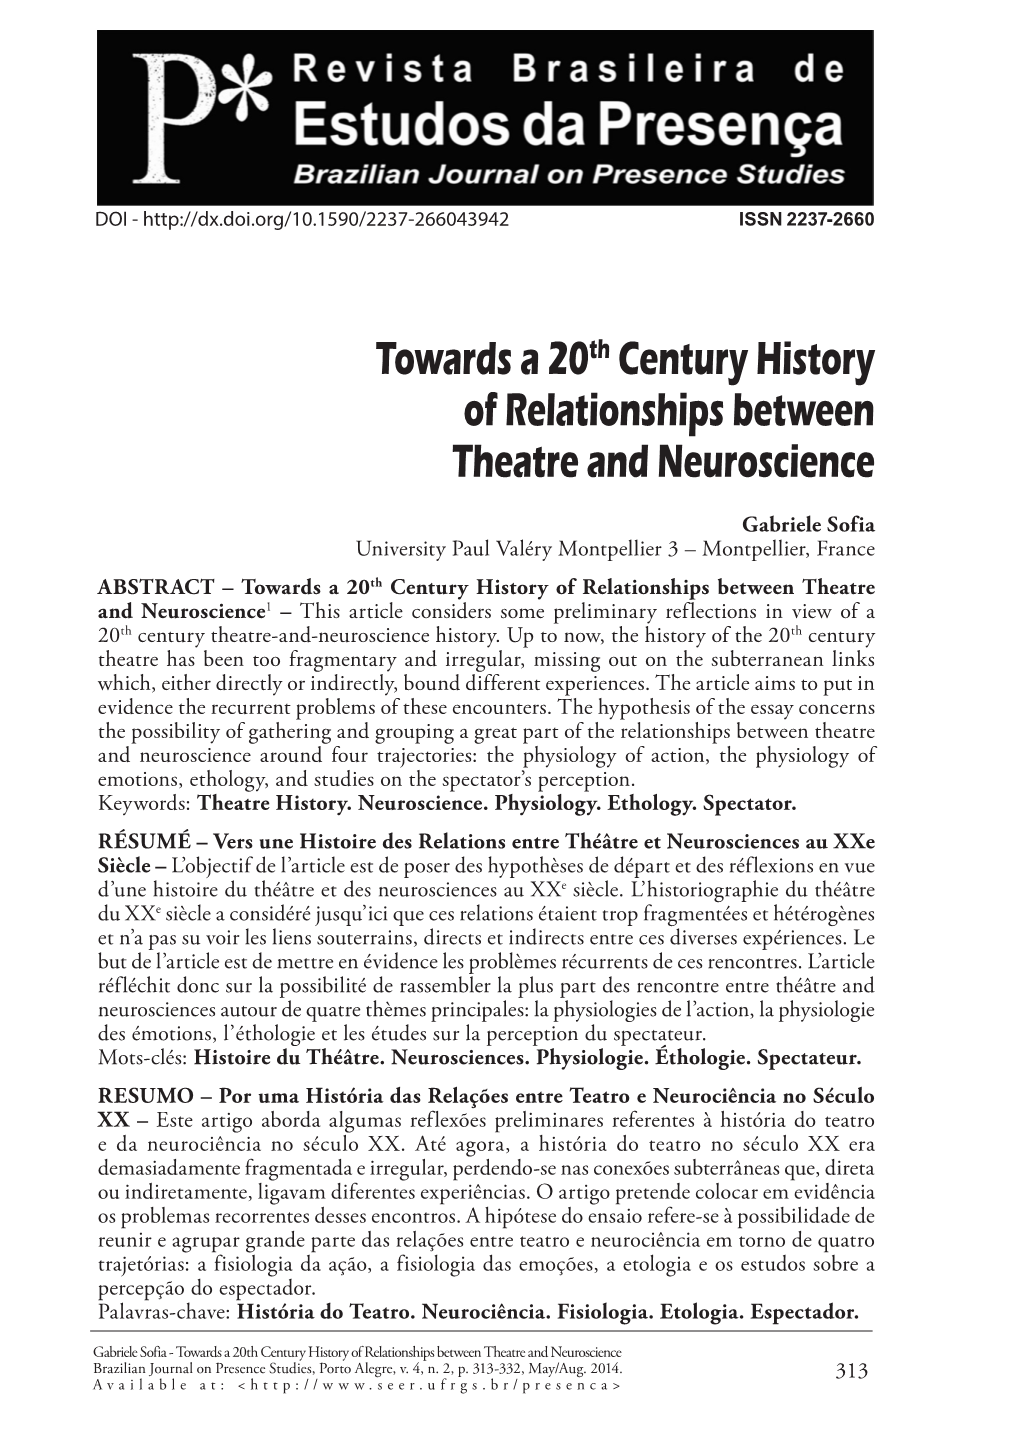 Towards a 20Th Century History of Relationships Between Theatre and Neuroscience